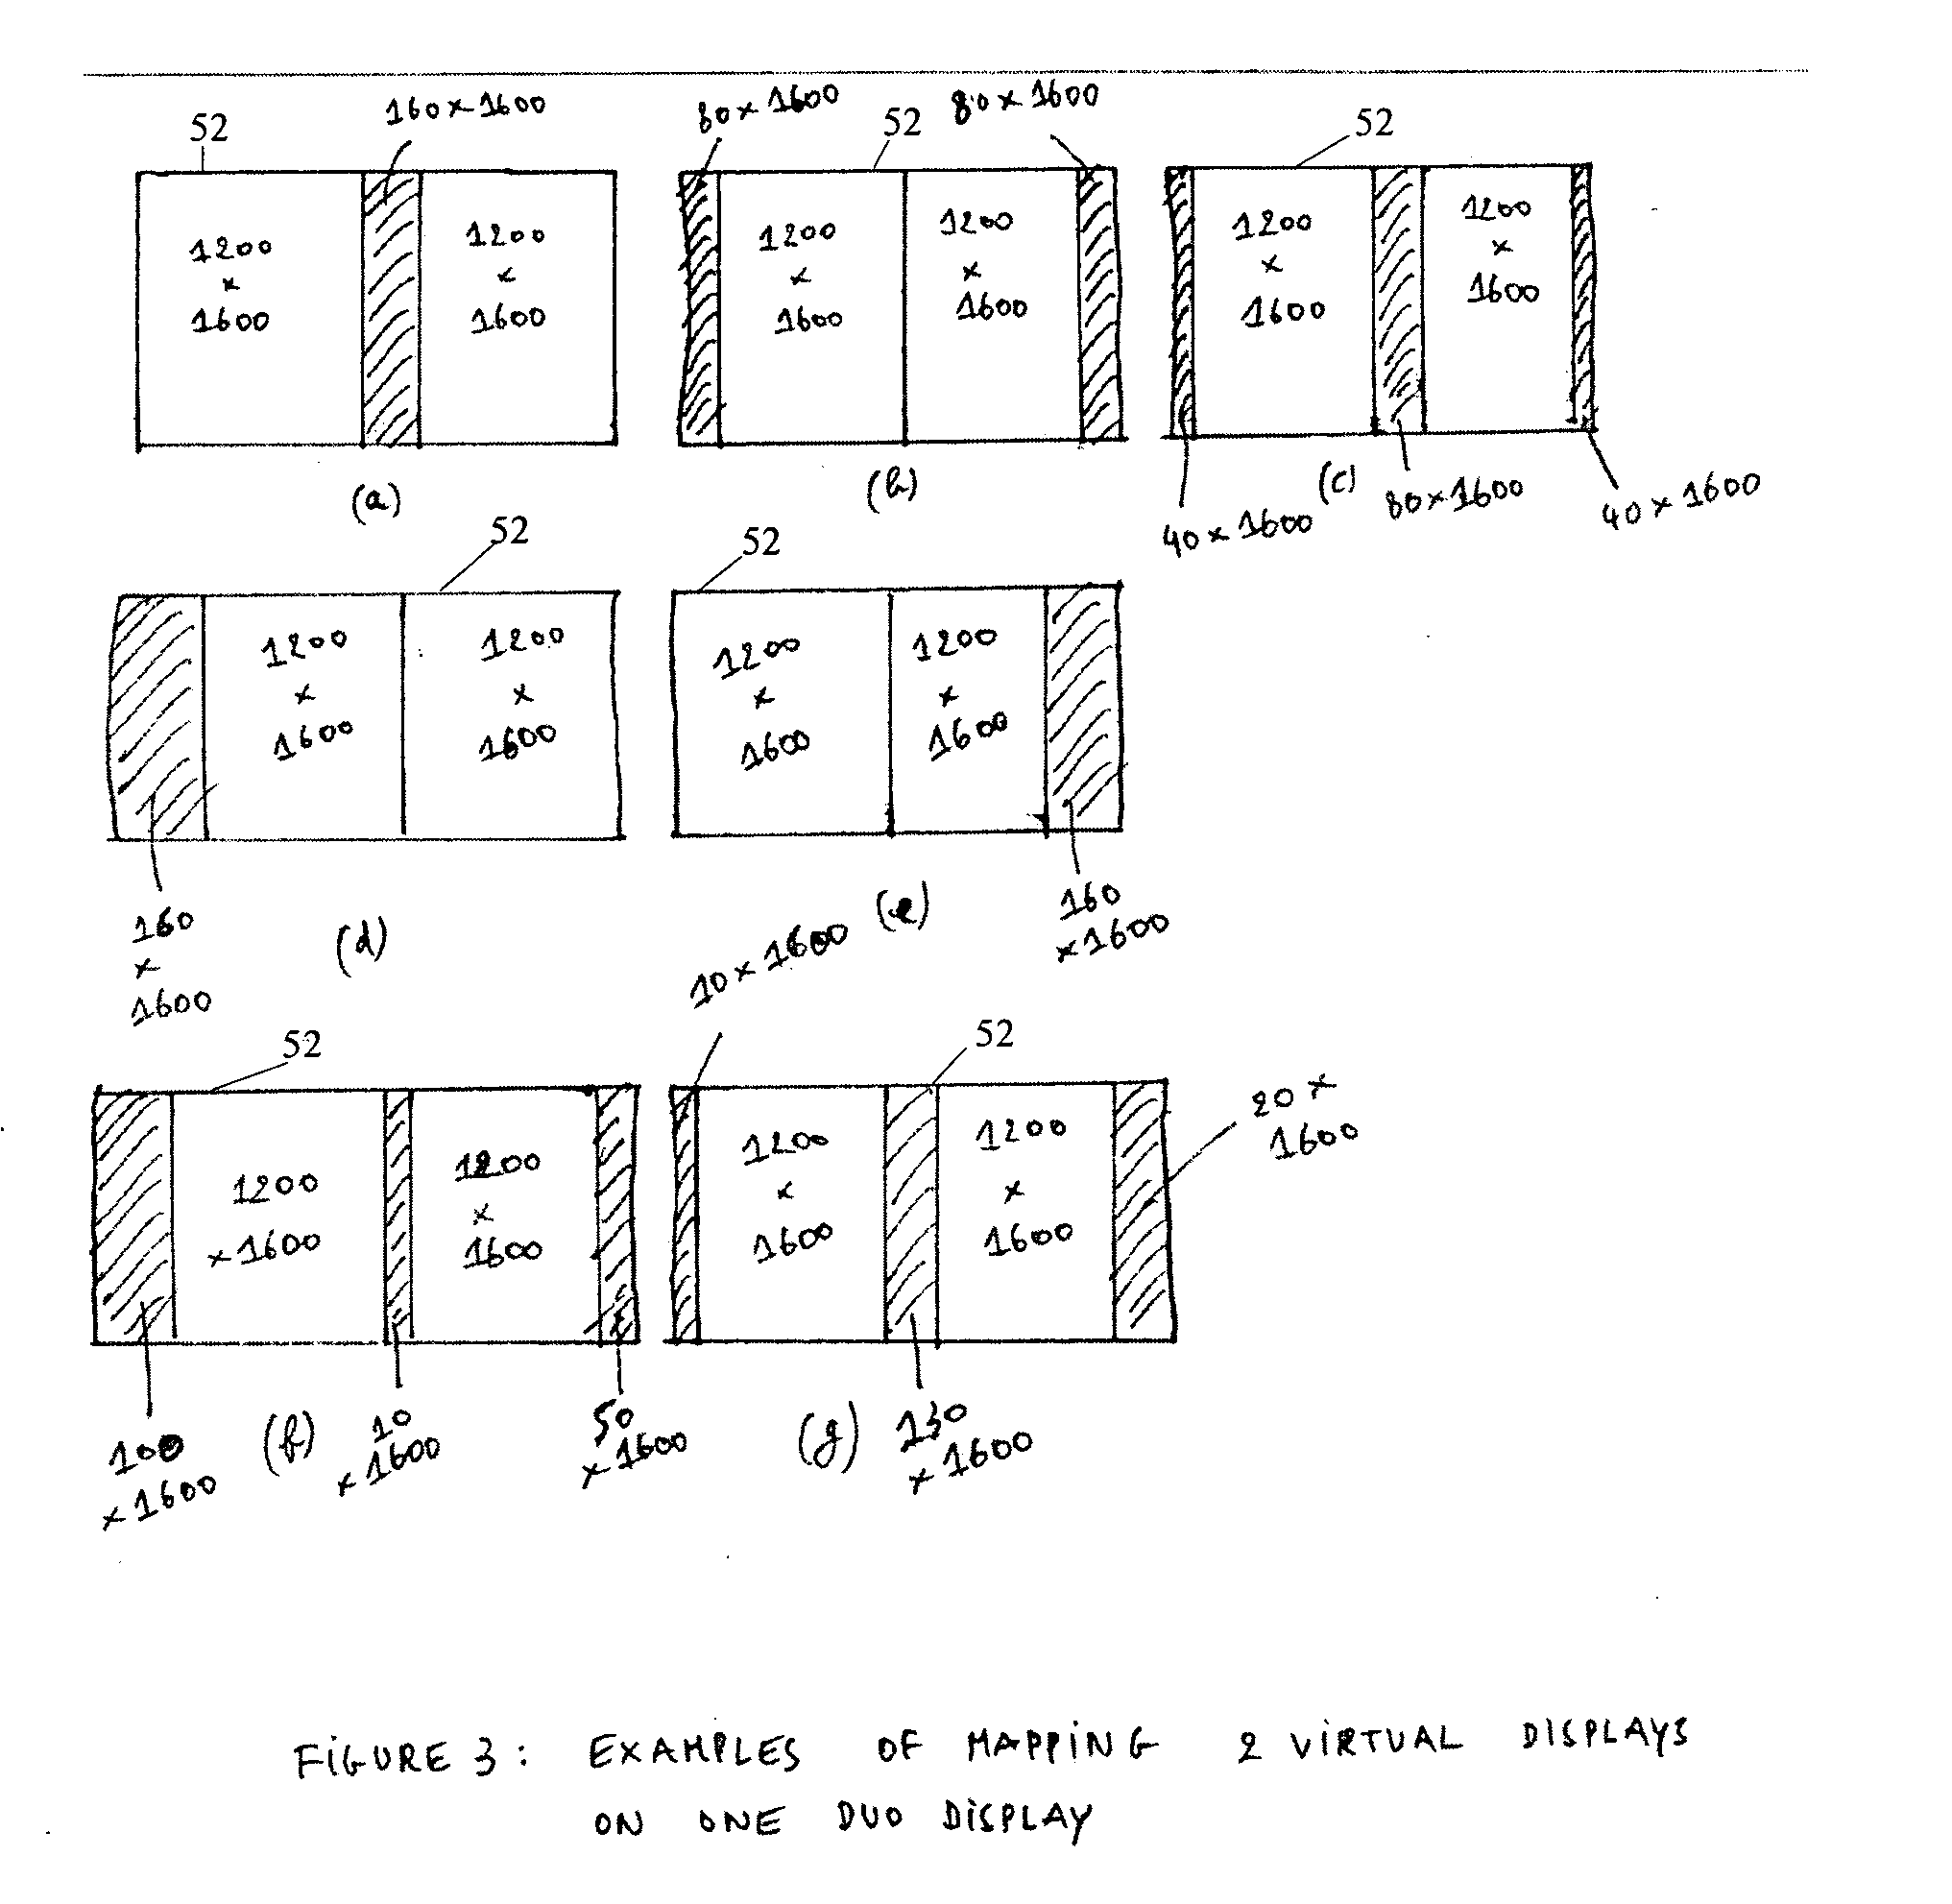 Display system for viewing multiple video signals